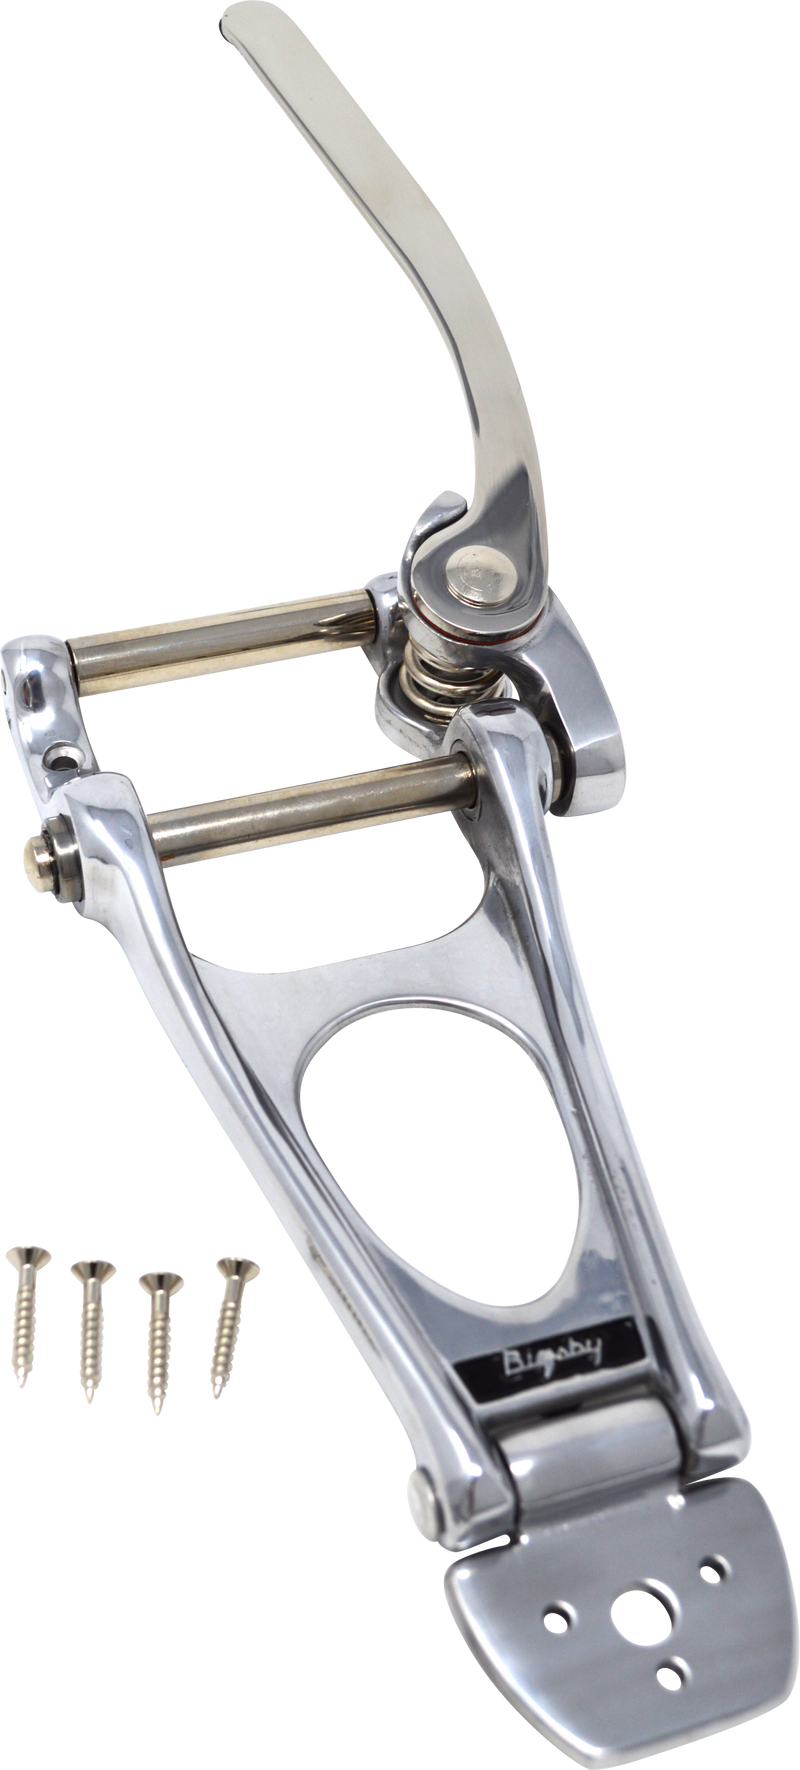 Bigsby B12 Tailpiece with Tension Bar (Polished Aluminium)